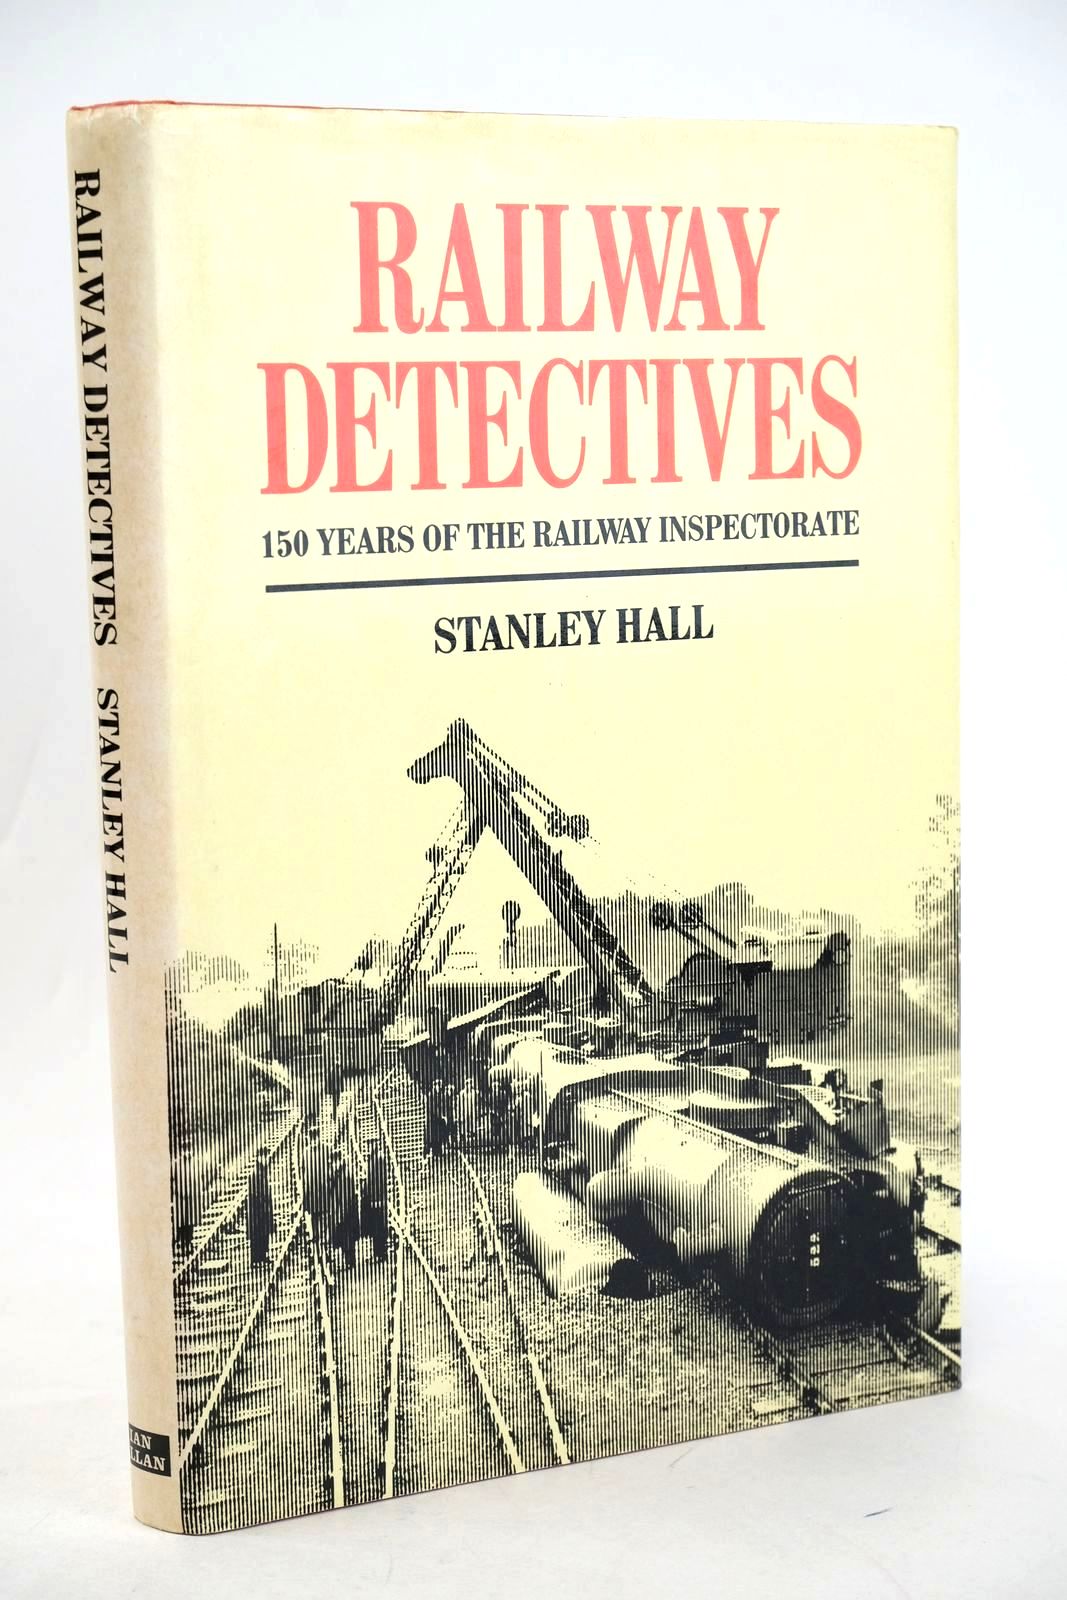 Photo of RAILWAY DETECTIVES written by Hall, Stanley published by Ian Allan Ltd. (STOCK CODE: 1327437)  for sale by Stella & Rose's Books